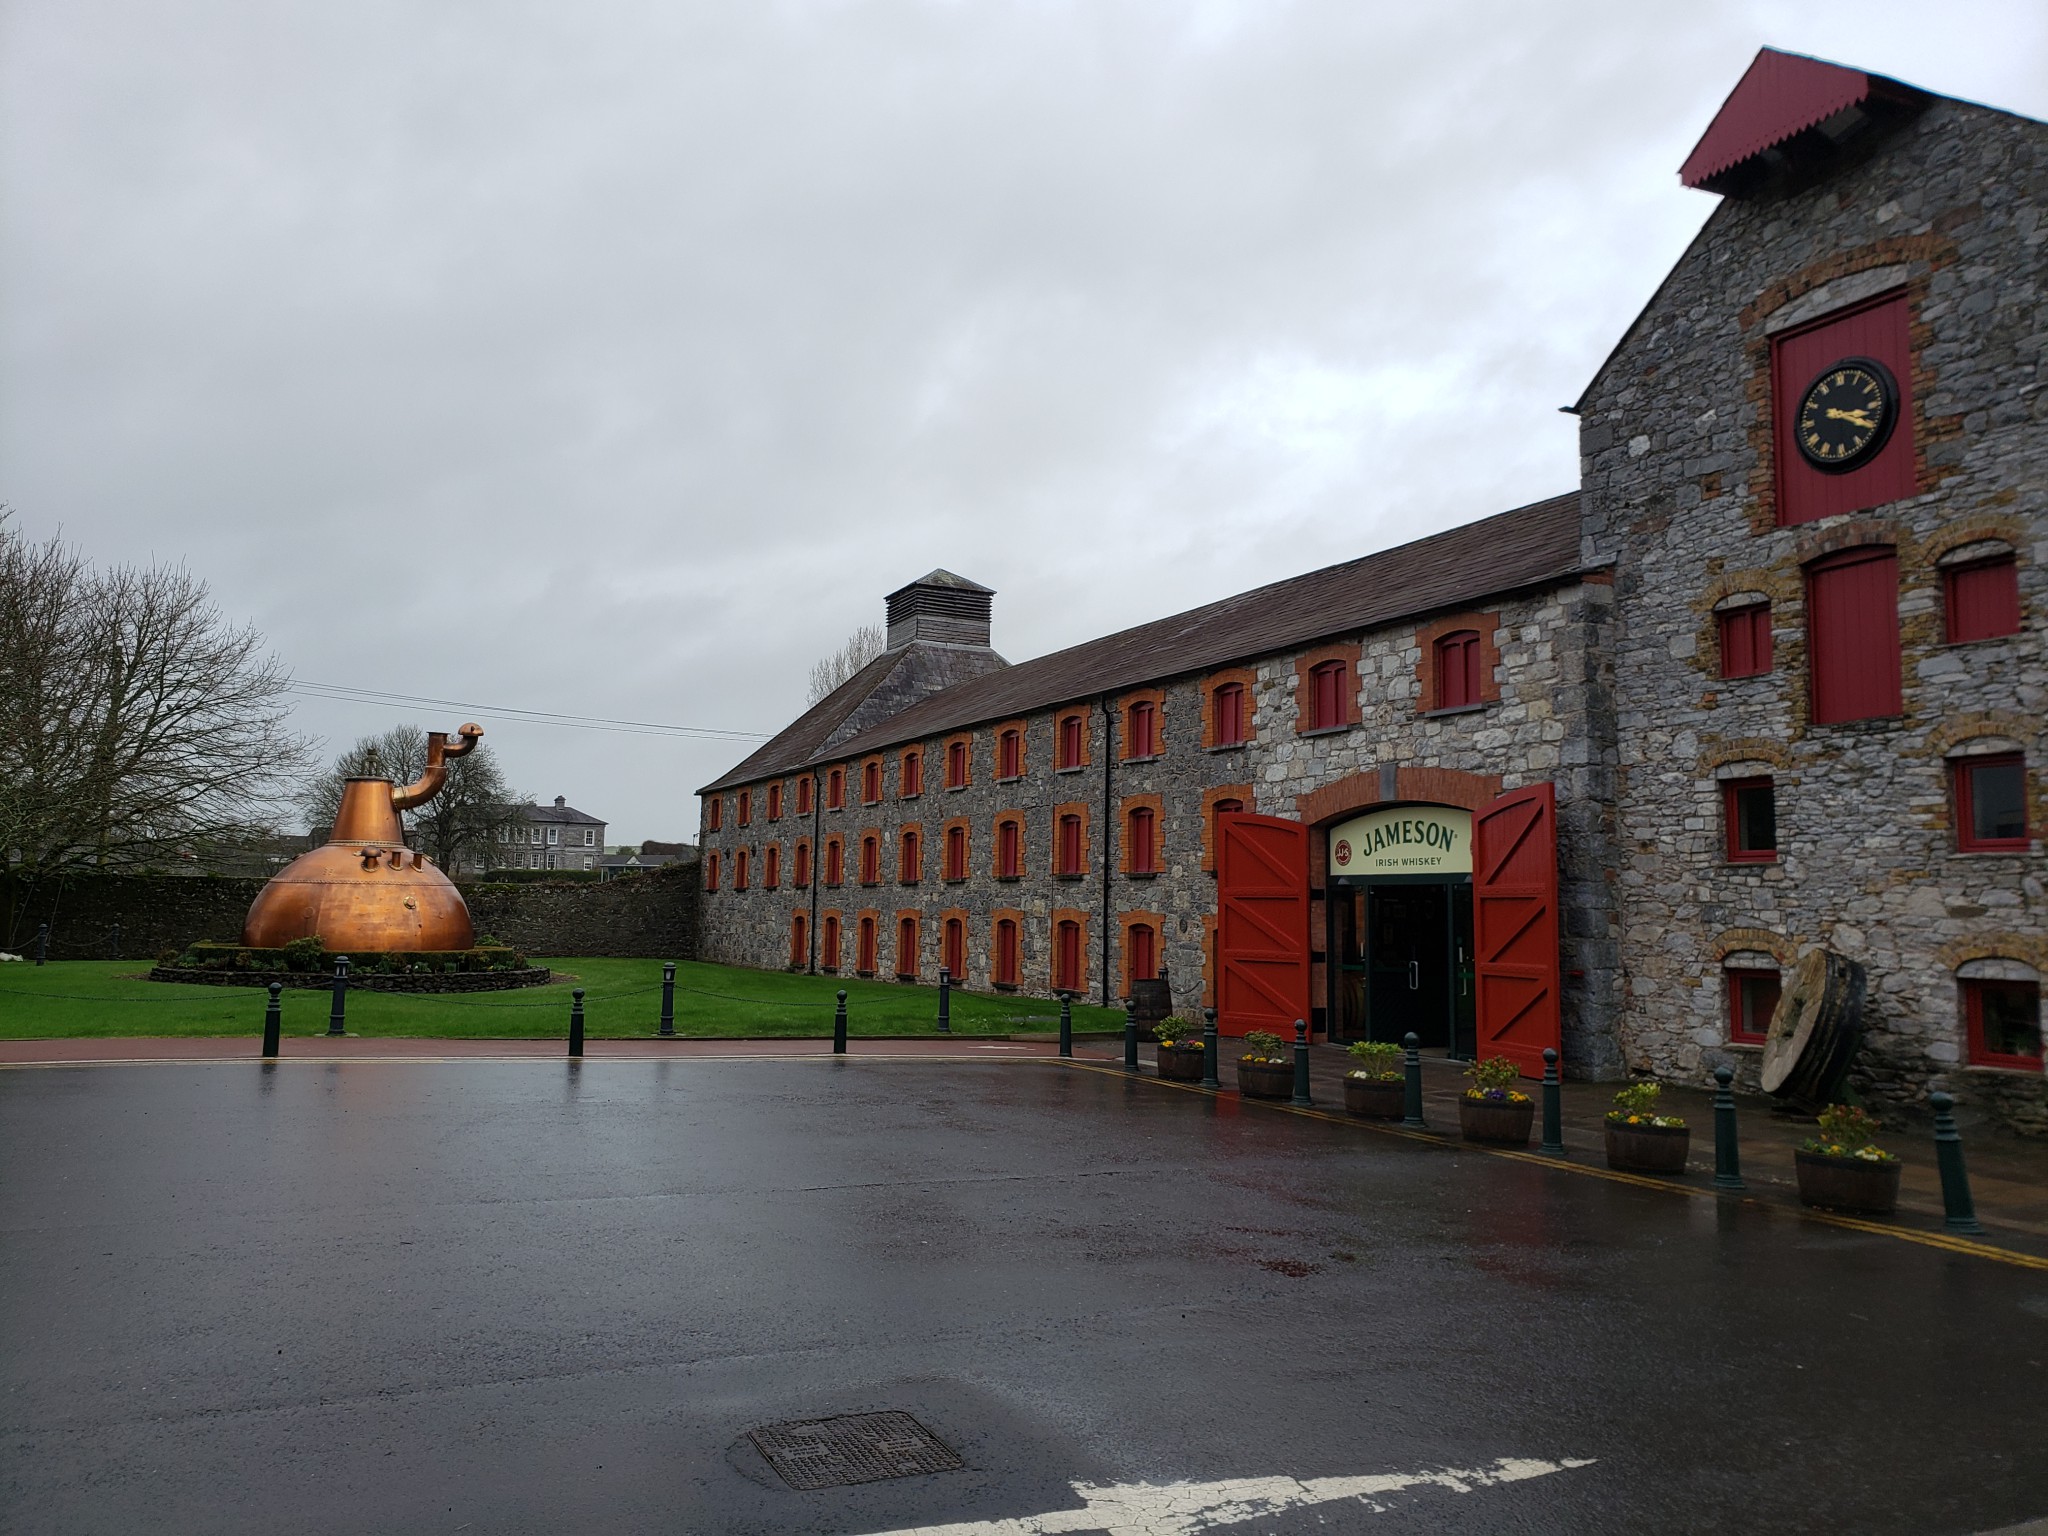 Cork Day 3 – 2/2/2020 – A Second trip to the Jameson Distillery